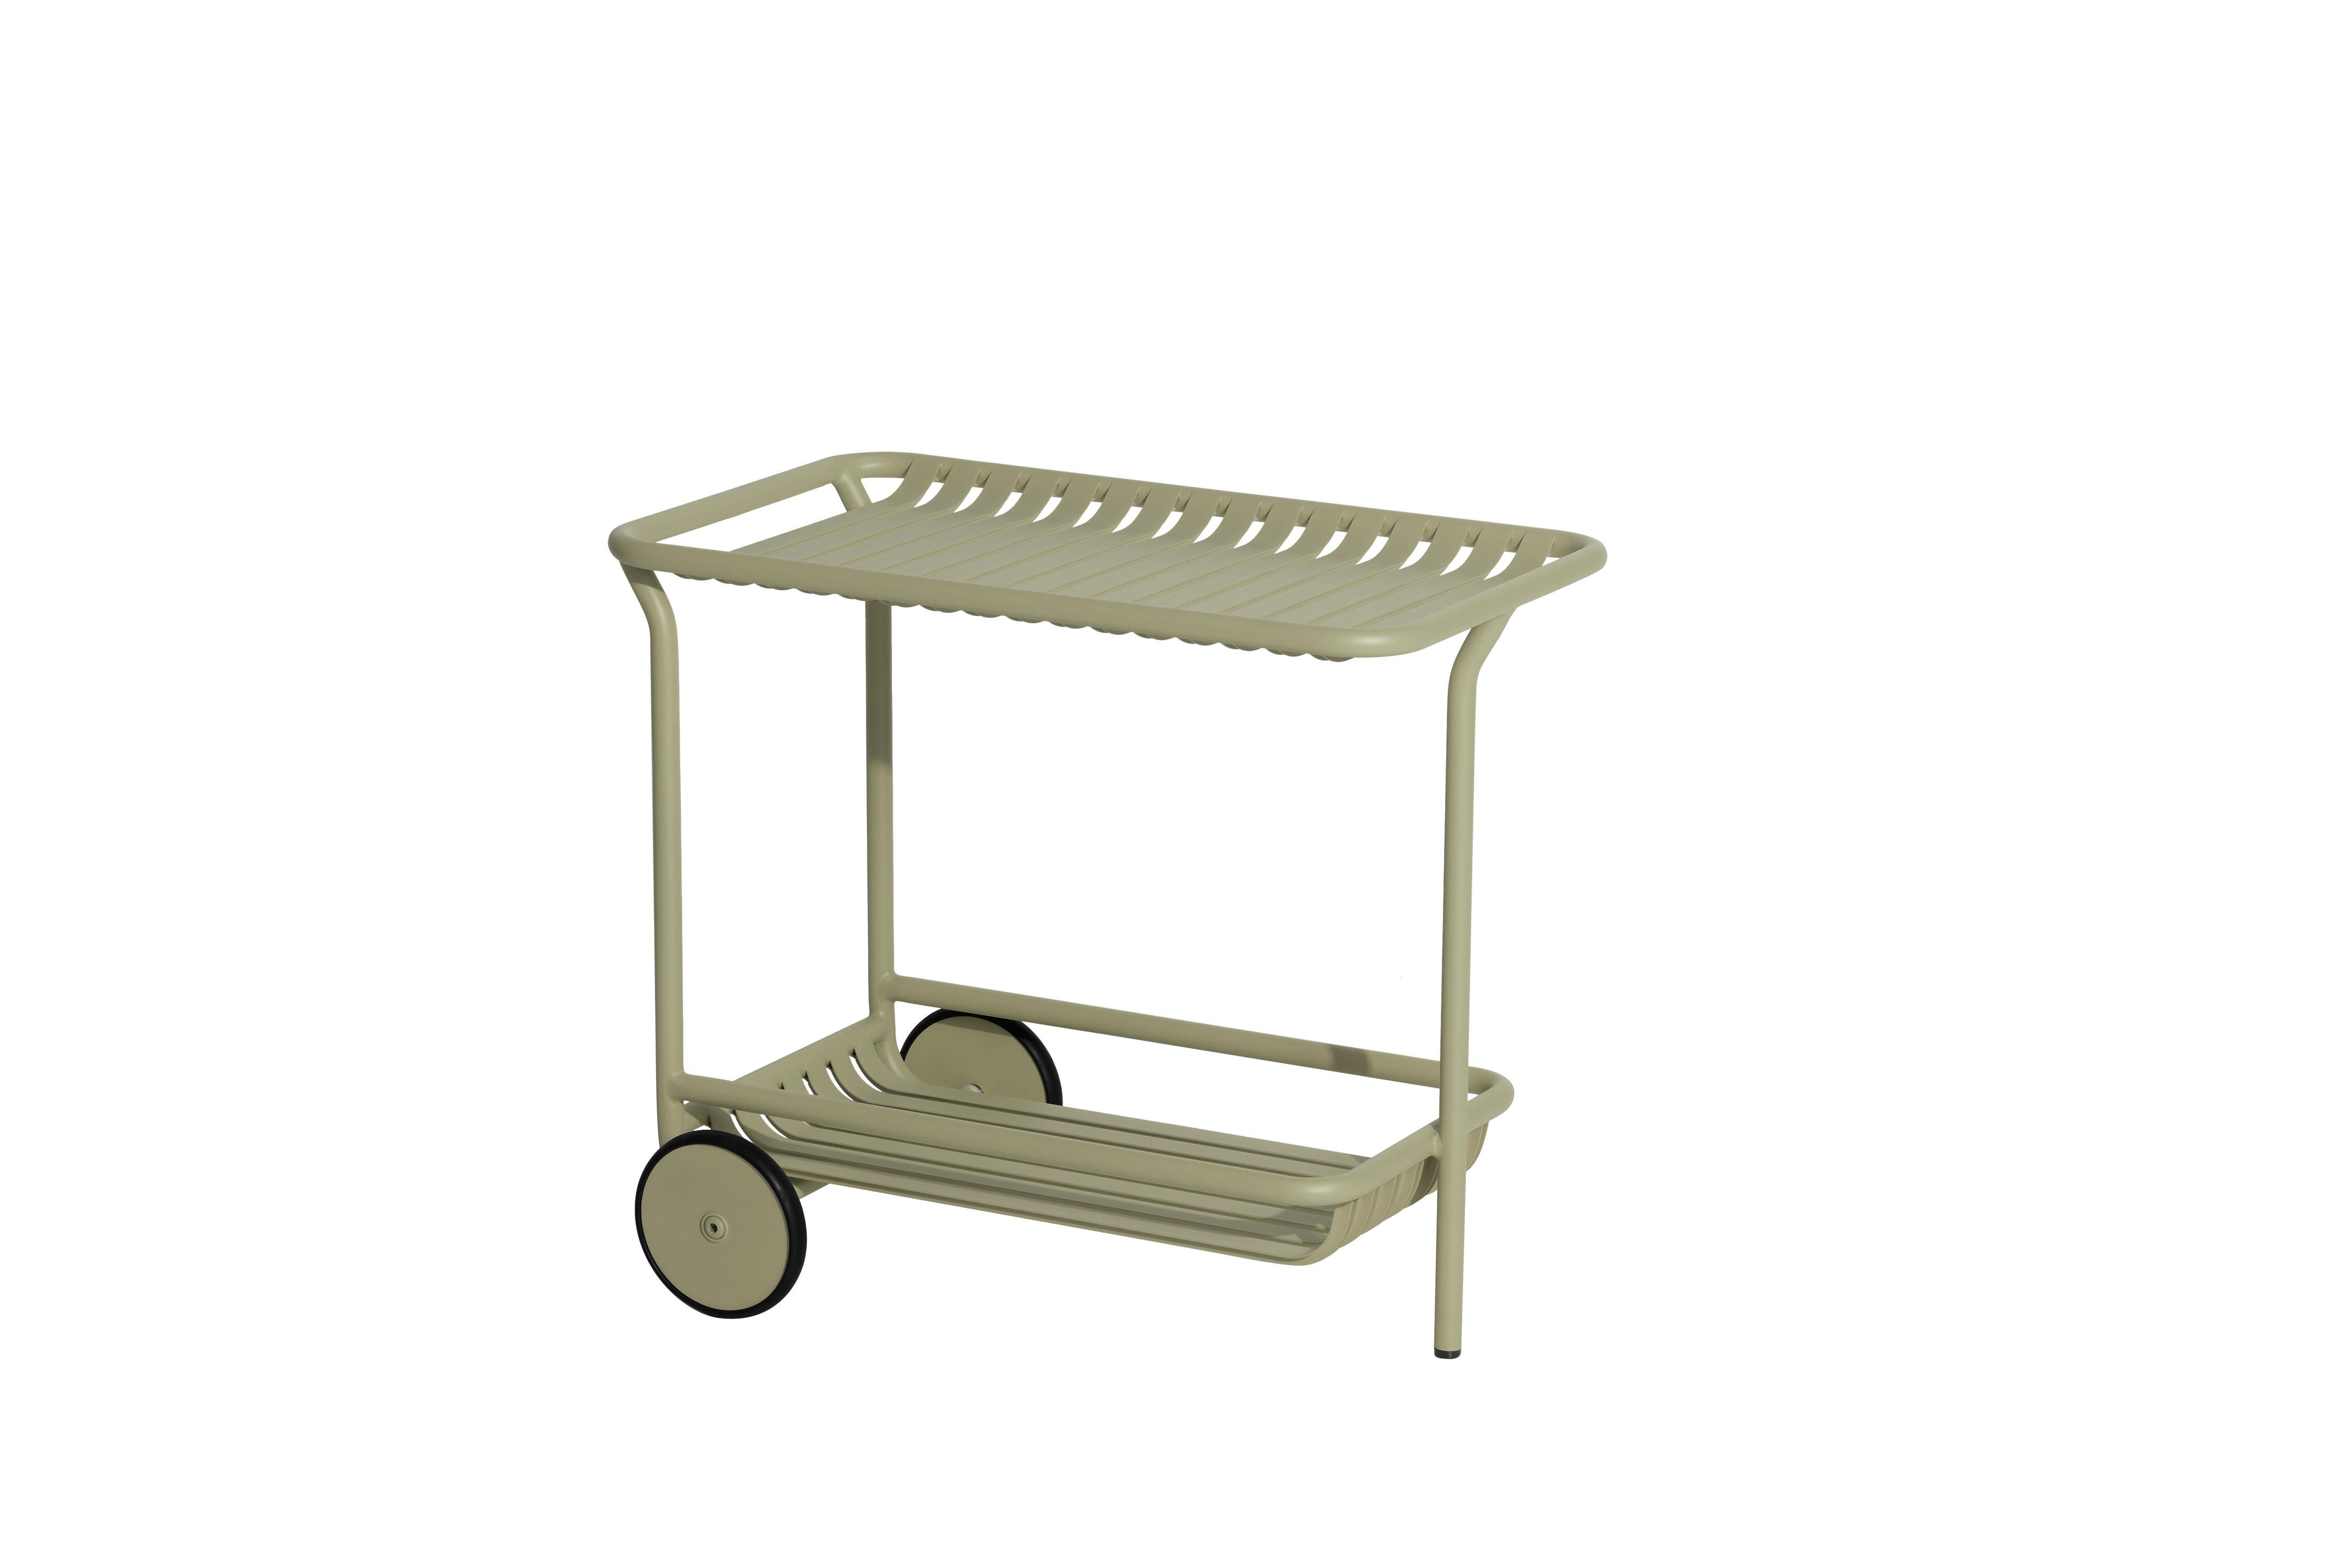 Petite Friture Week-End Trolley in Jade Green Aluminium by Studio BrichetZiegler, 2017

The week-end collection is a full range of outdoor furniture, in aluminium grained epoxy paint, matt finish, that includes 18 functions and 8 colours for the